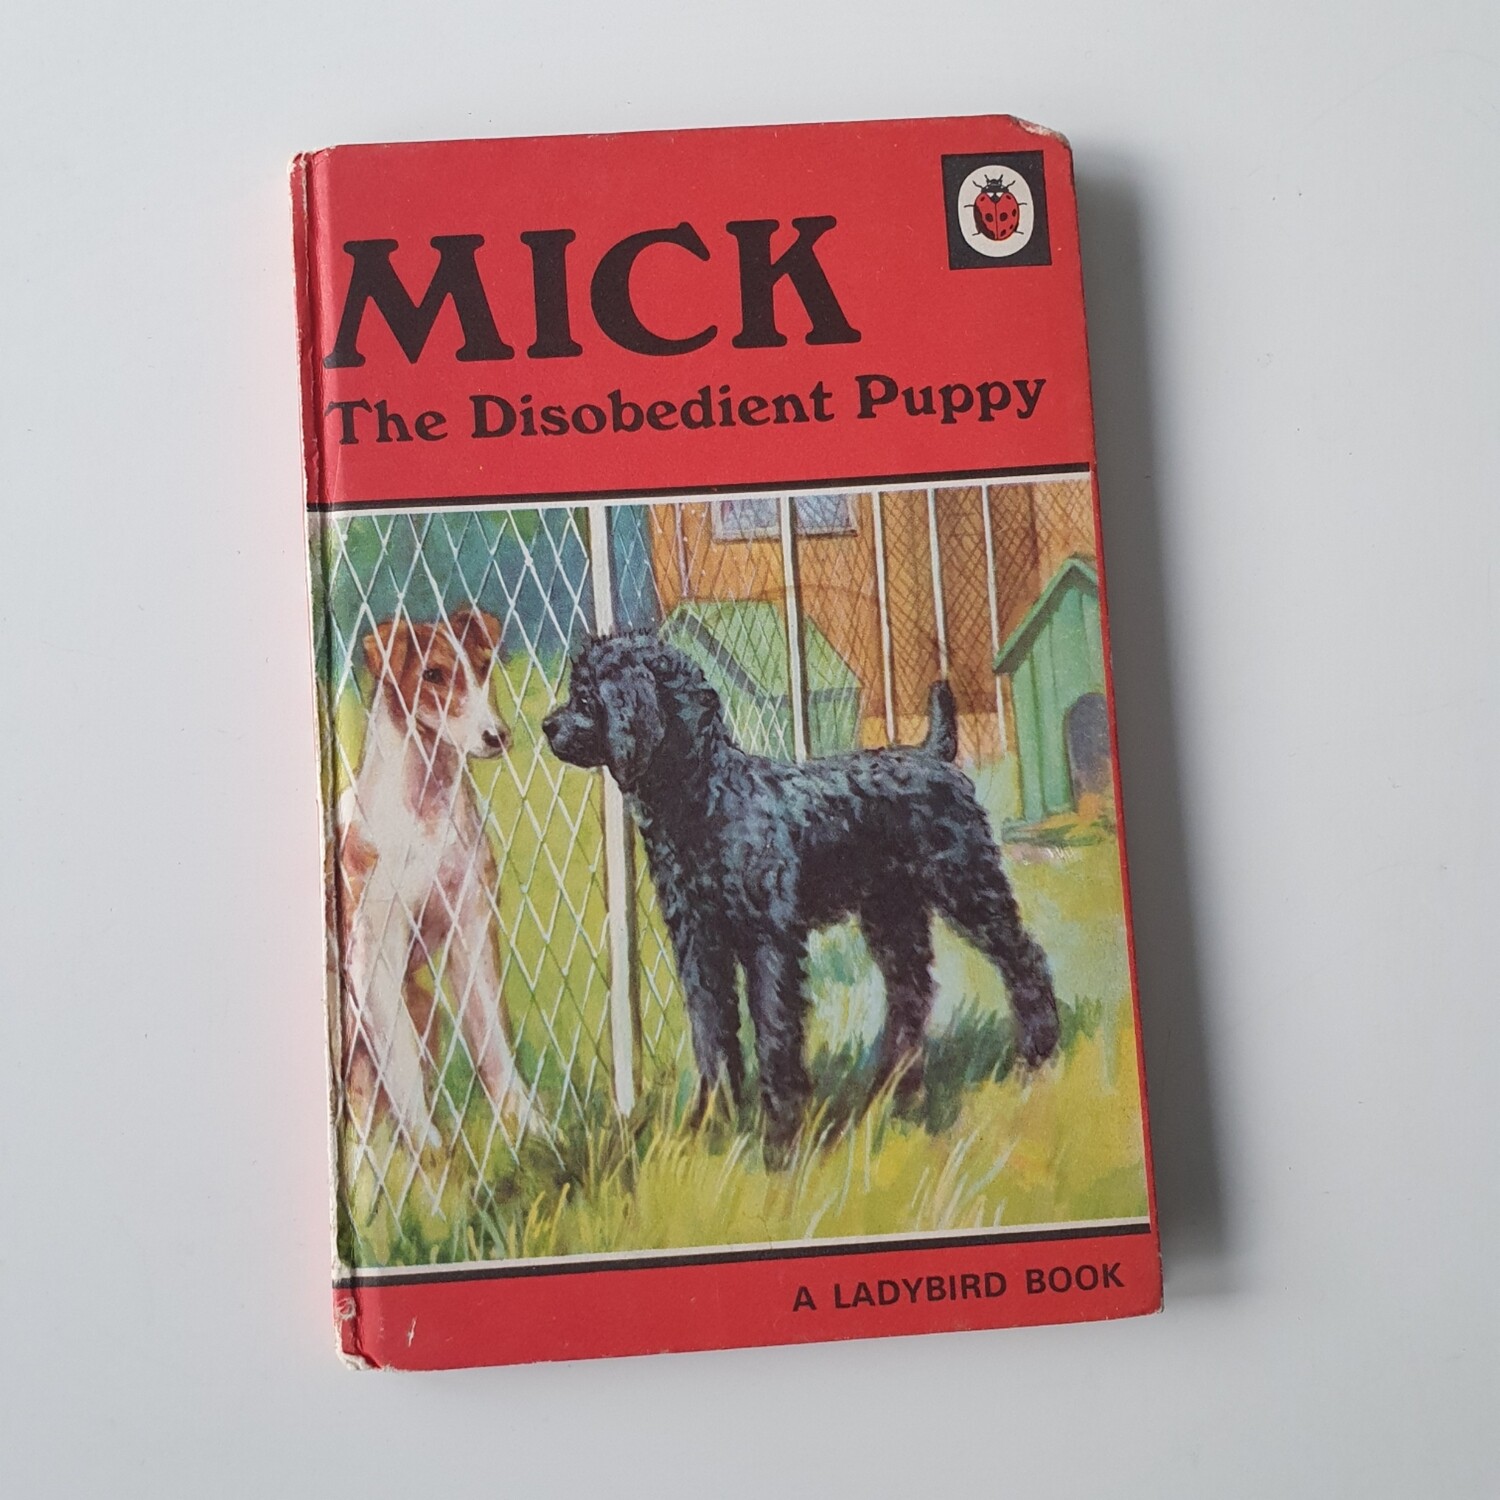 Mick the Disobedient Puppy Notebook - Ladybird book, dog 